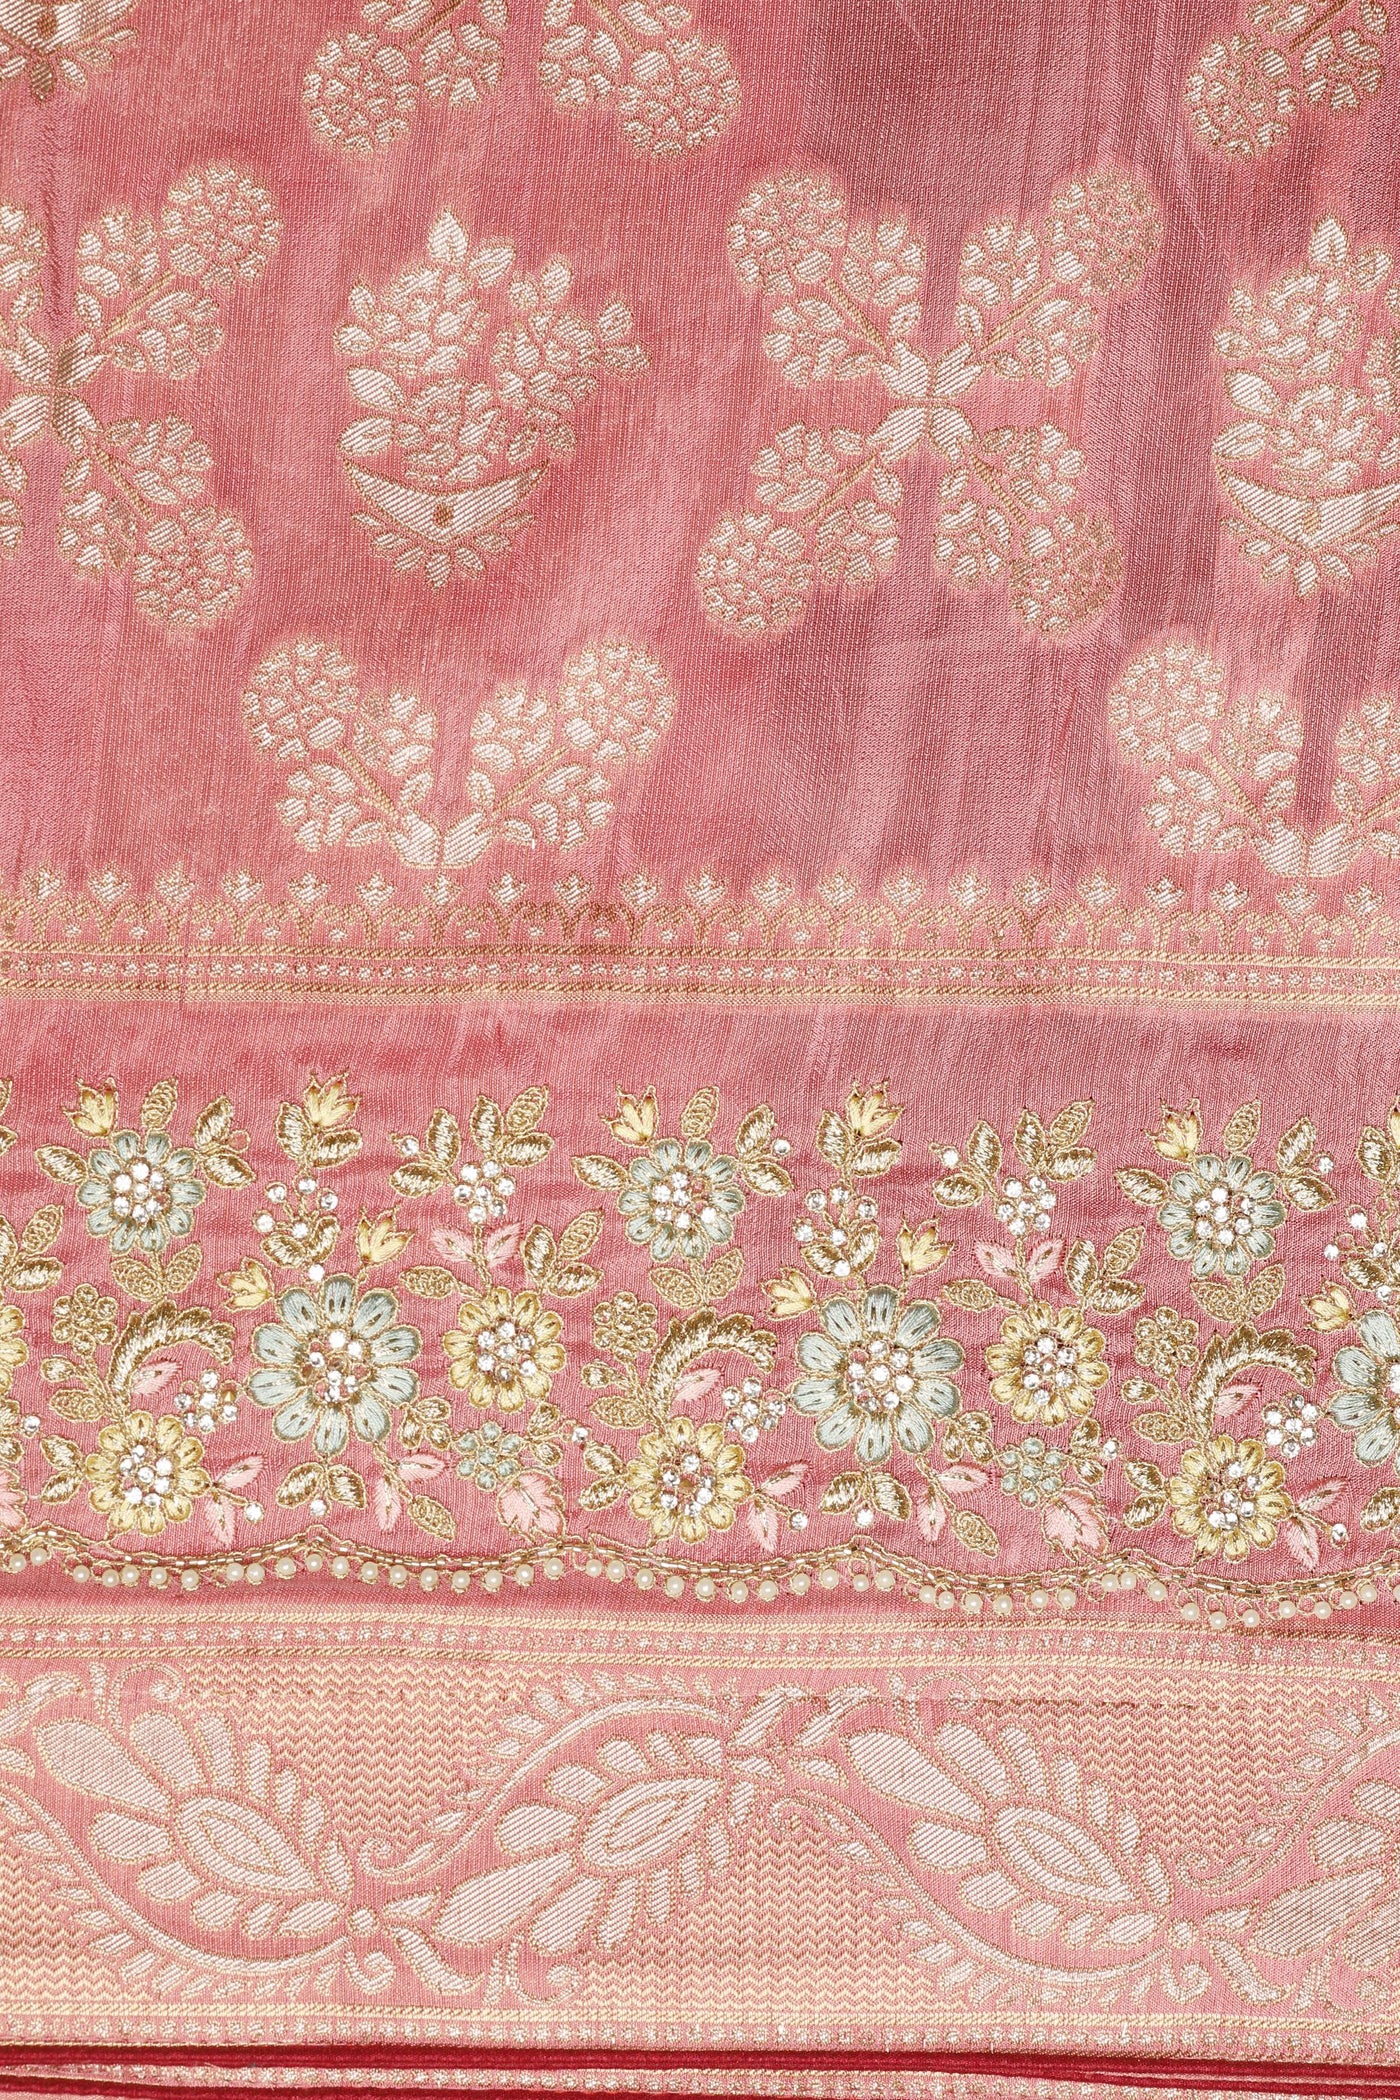 Enchanting Pink Silk Saree: A Tapestry of Glamour"